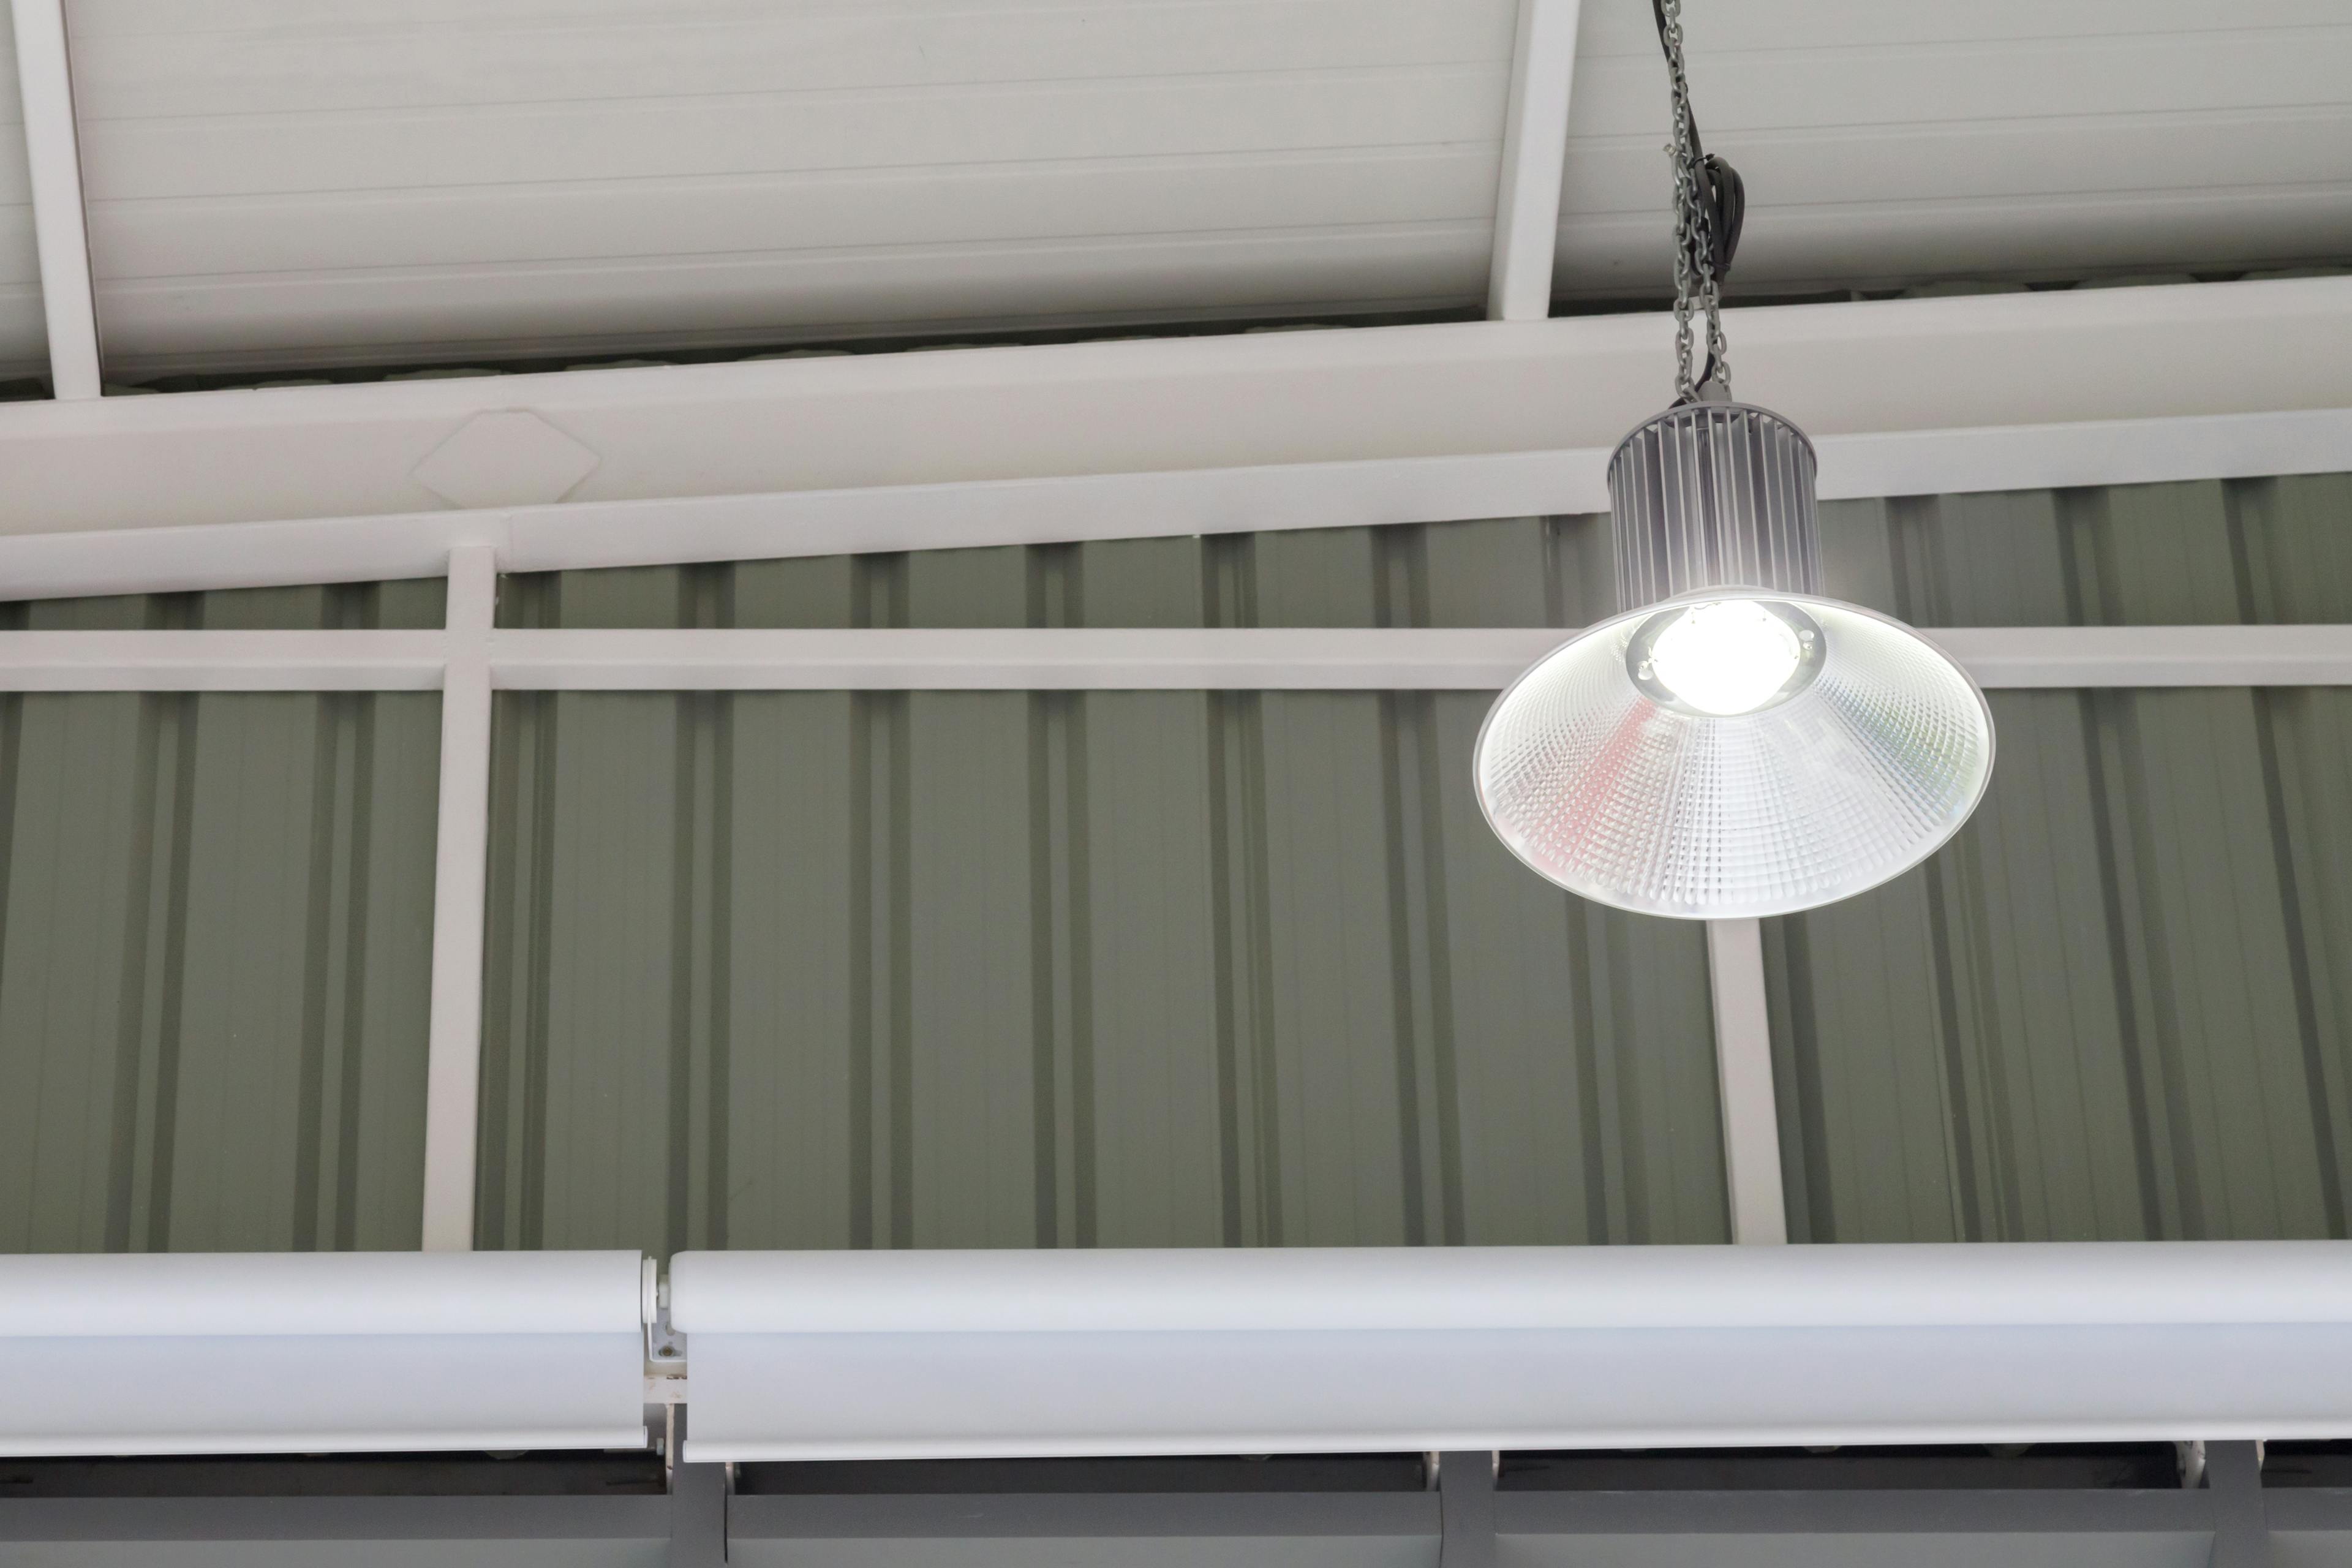 An image related to High Bay Warehouse Lighting